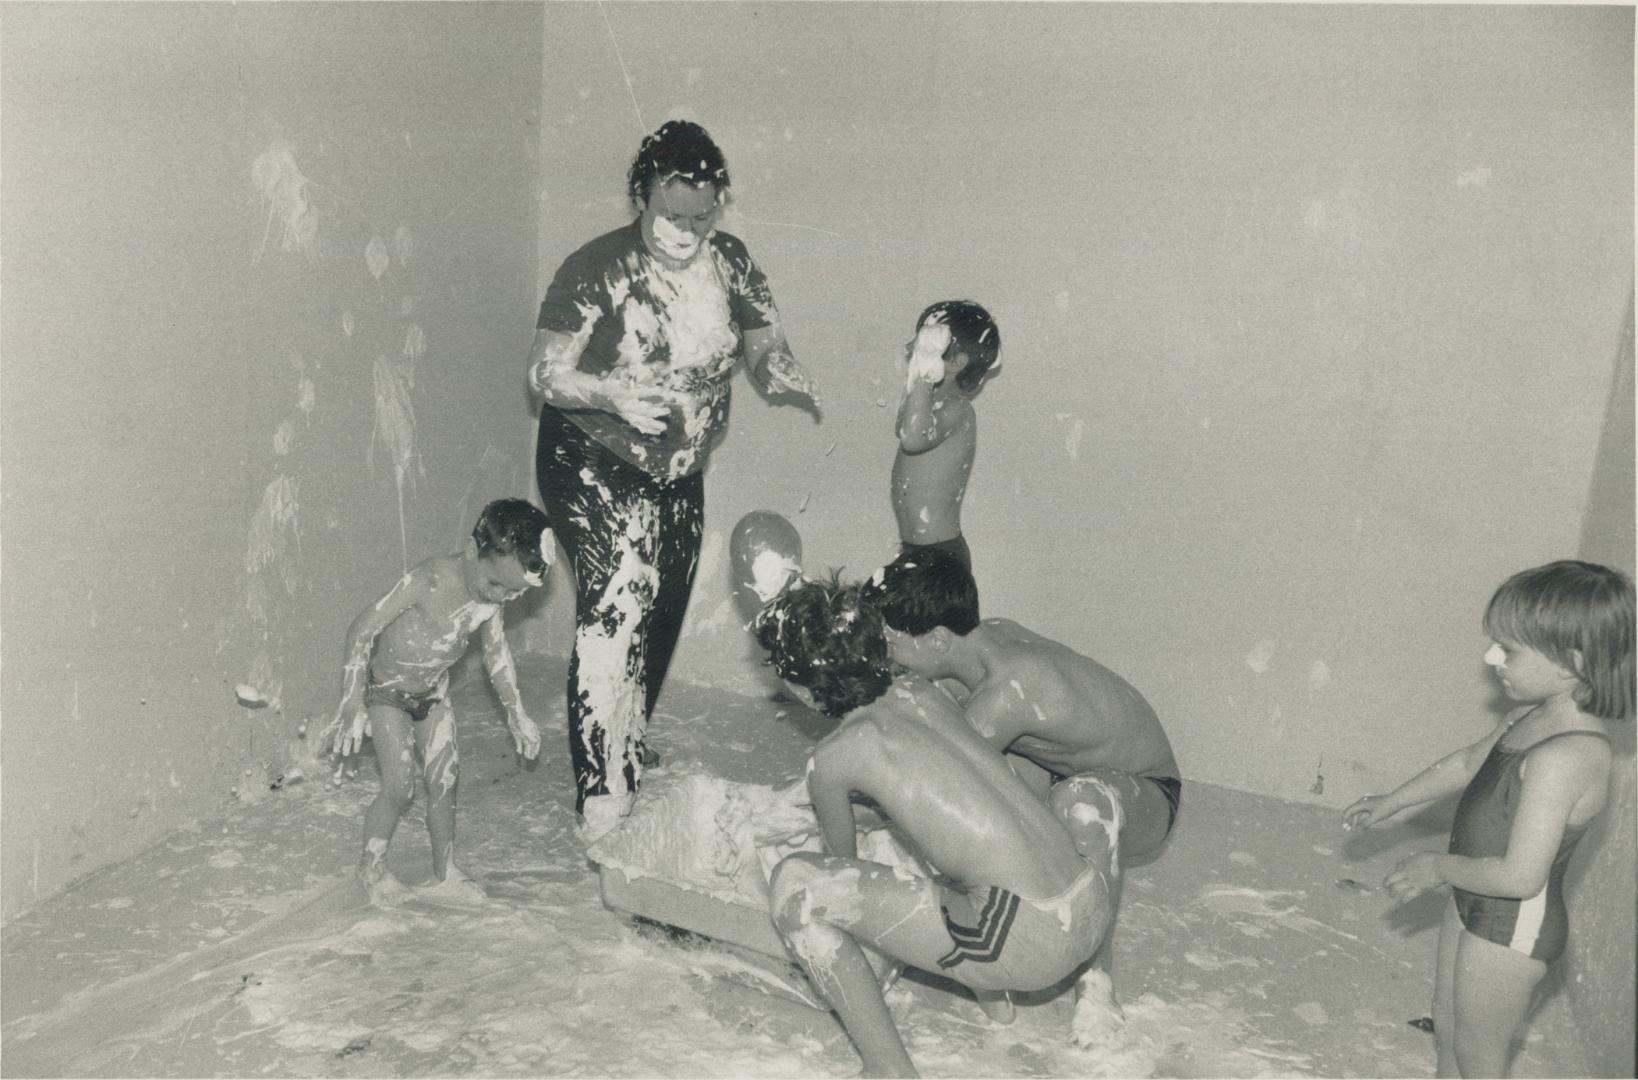 Happy birthday: Helen Bell, manager of the Mad Hatter, gets dirty with a group of youngsters during a whipped cream fight at one of the establishment's regular parties